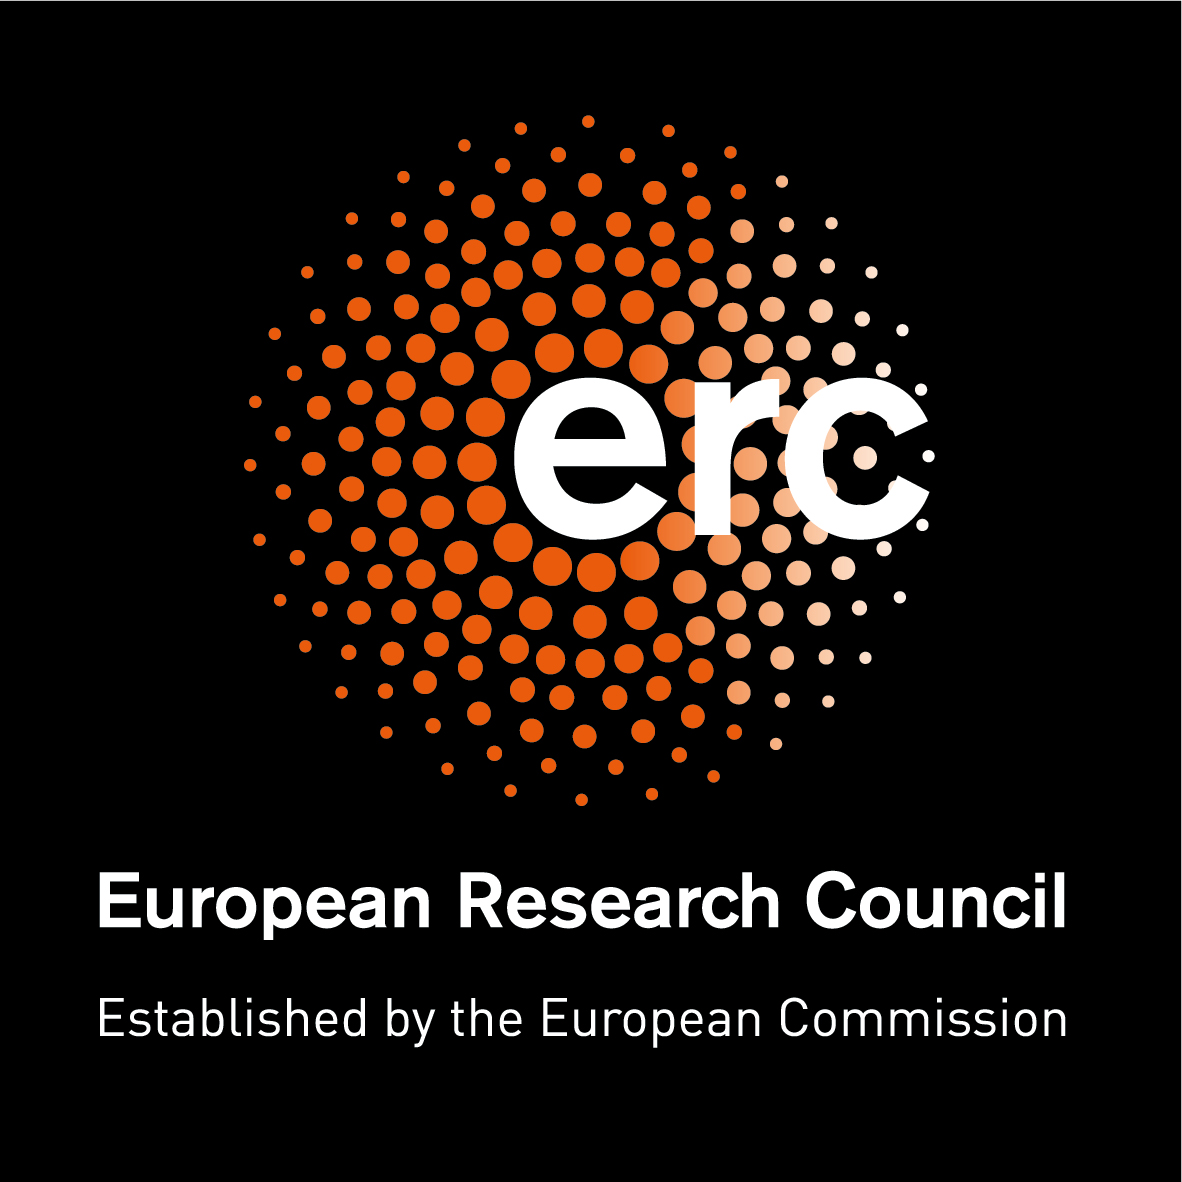 Communicating your research | ERC: European Research Council